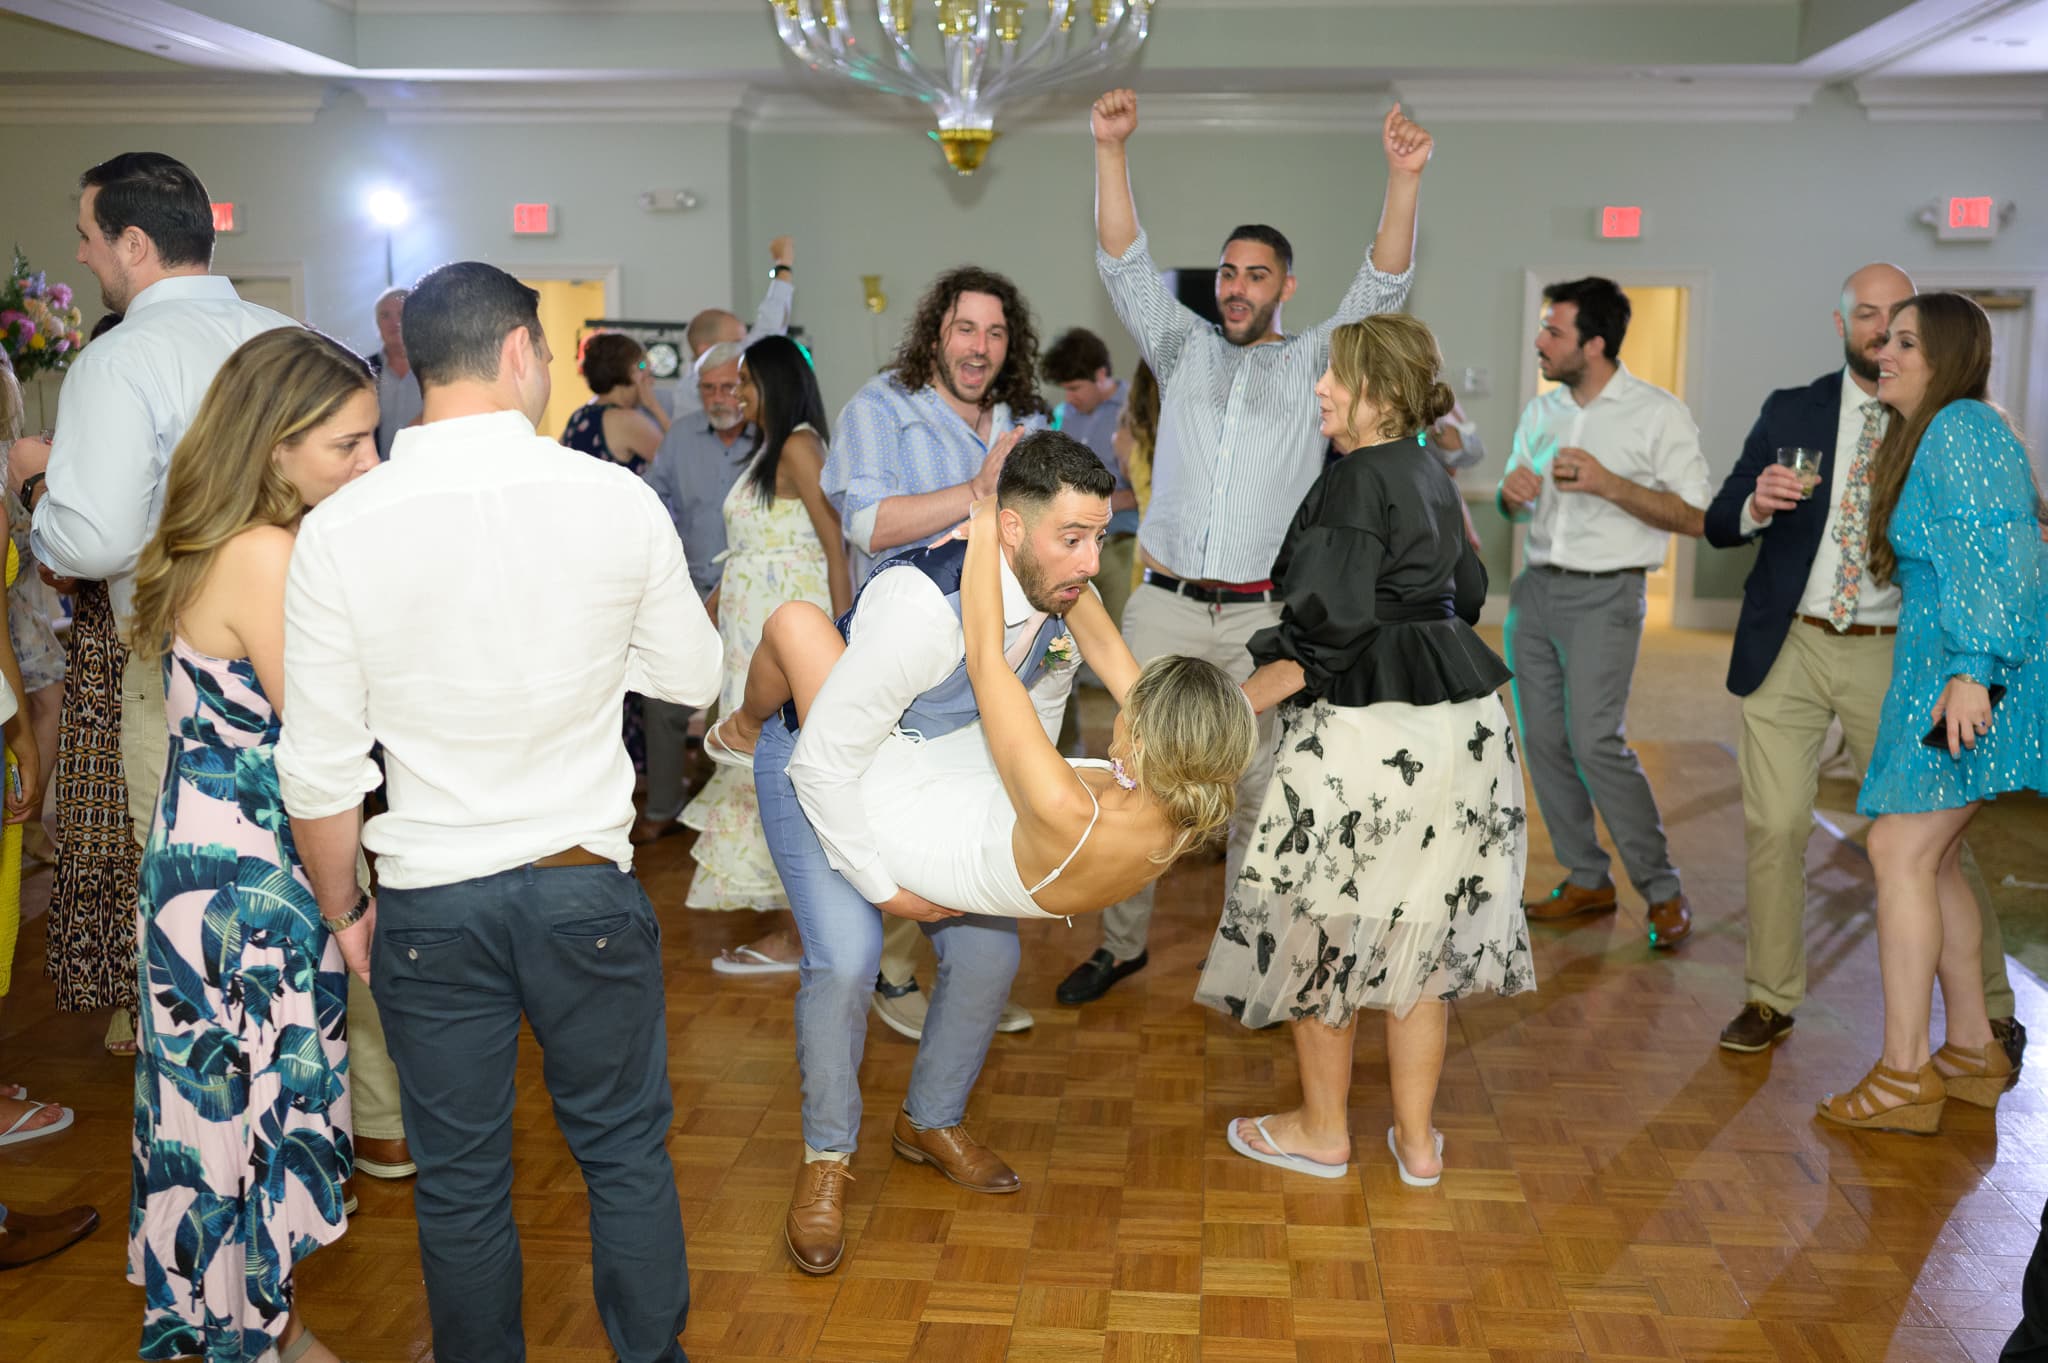 Bride and groom getting wild on the dance floor - Pawleys Plantation Golf & Country Club